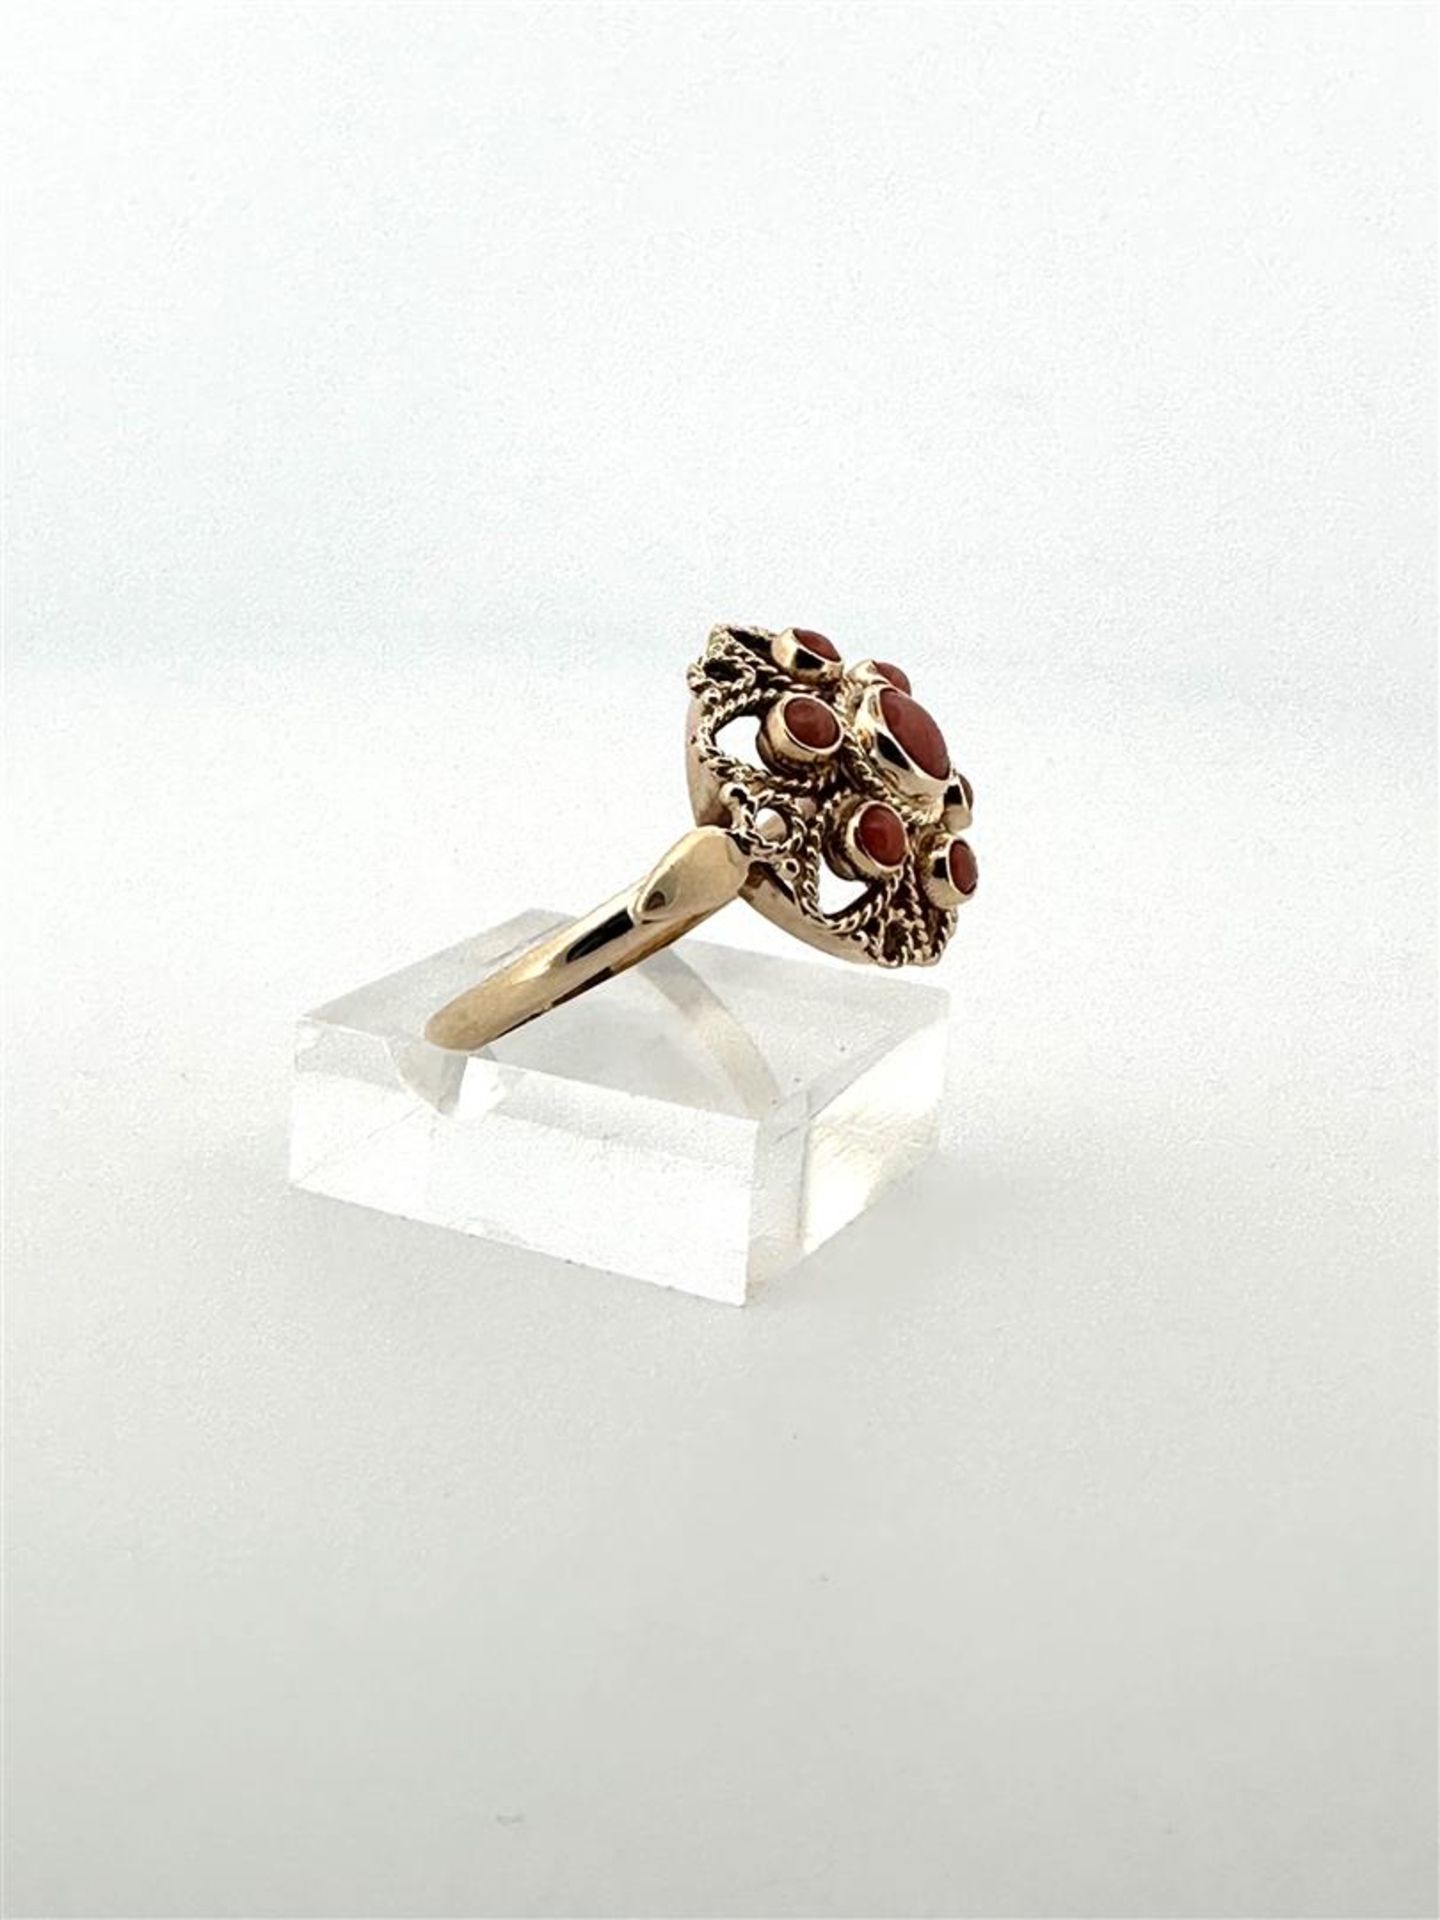 14kt rose gold rosette ring set with red coral.
The ring is gracefully finished with twisted wire an - Image 2 of 5